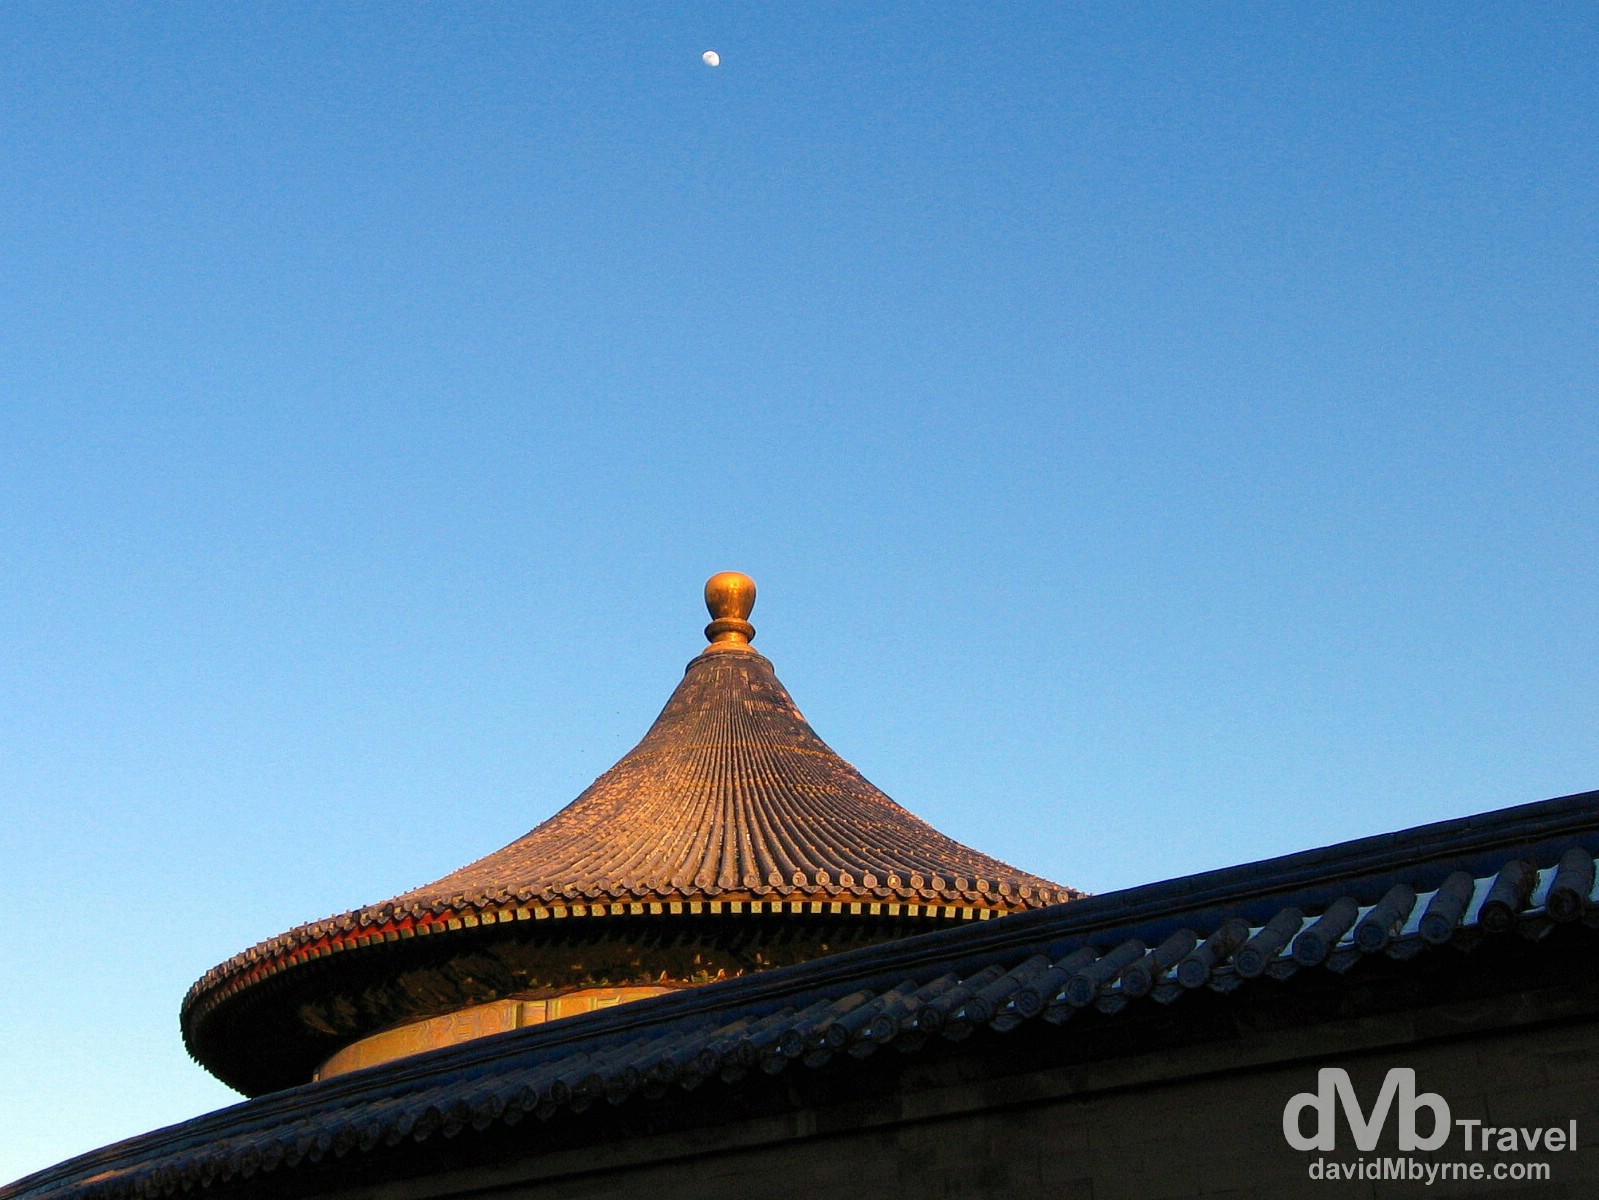 The roof of the Imperial Vault of Heaven, one of the buildings in the Temple of Heaven complex in Beijing, China. February 8, 2006.